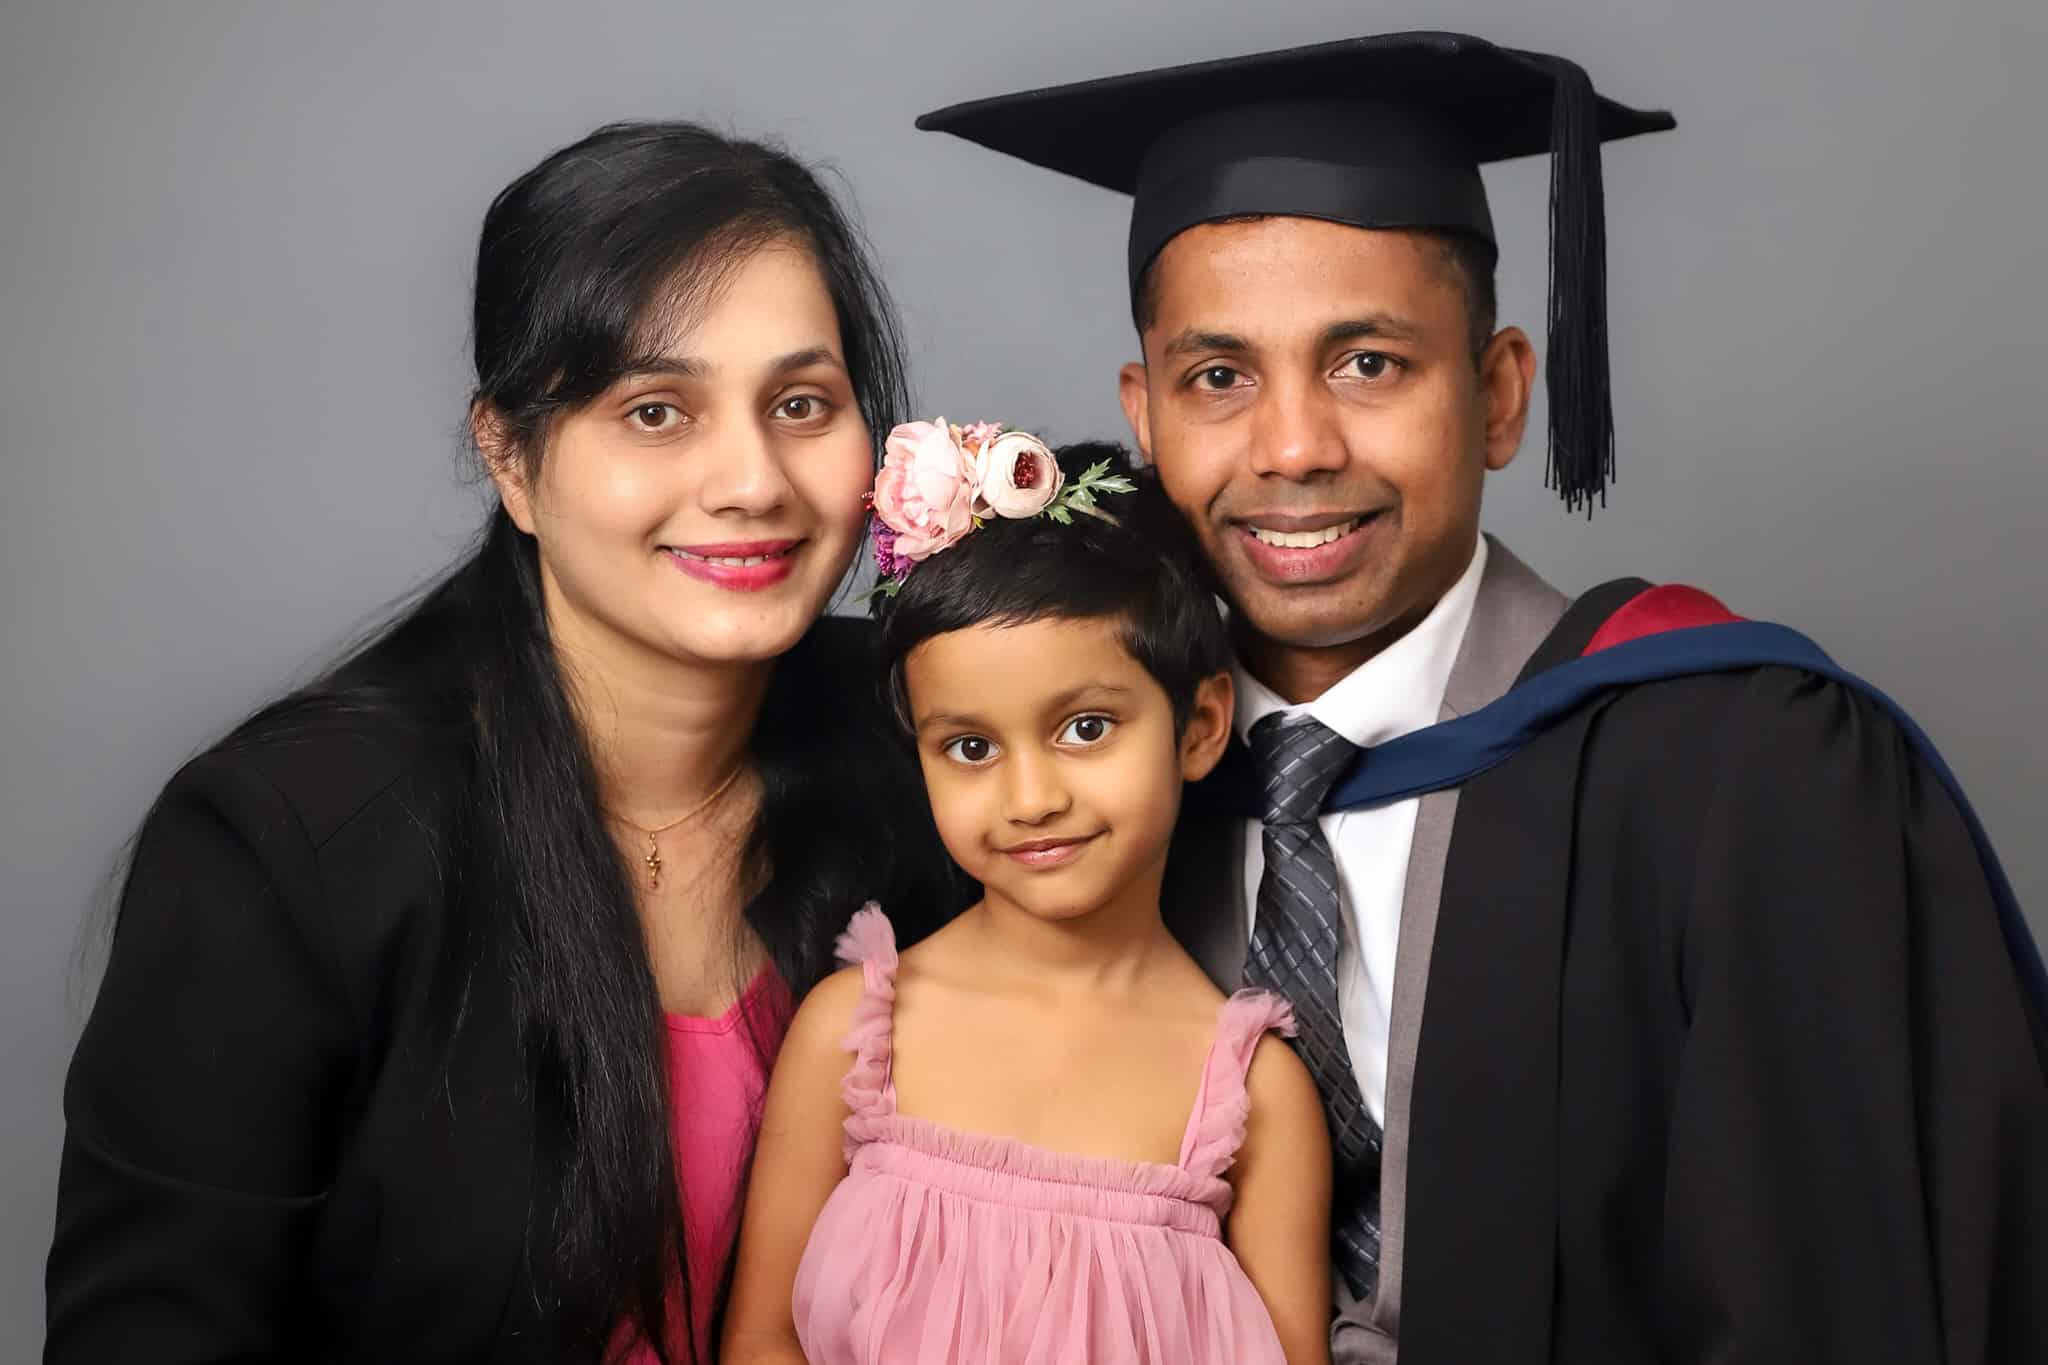 Asela Premaratne - now with a Masters in Construction Law with Distinction